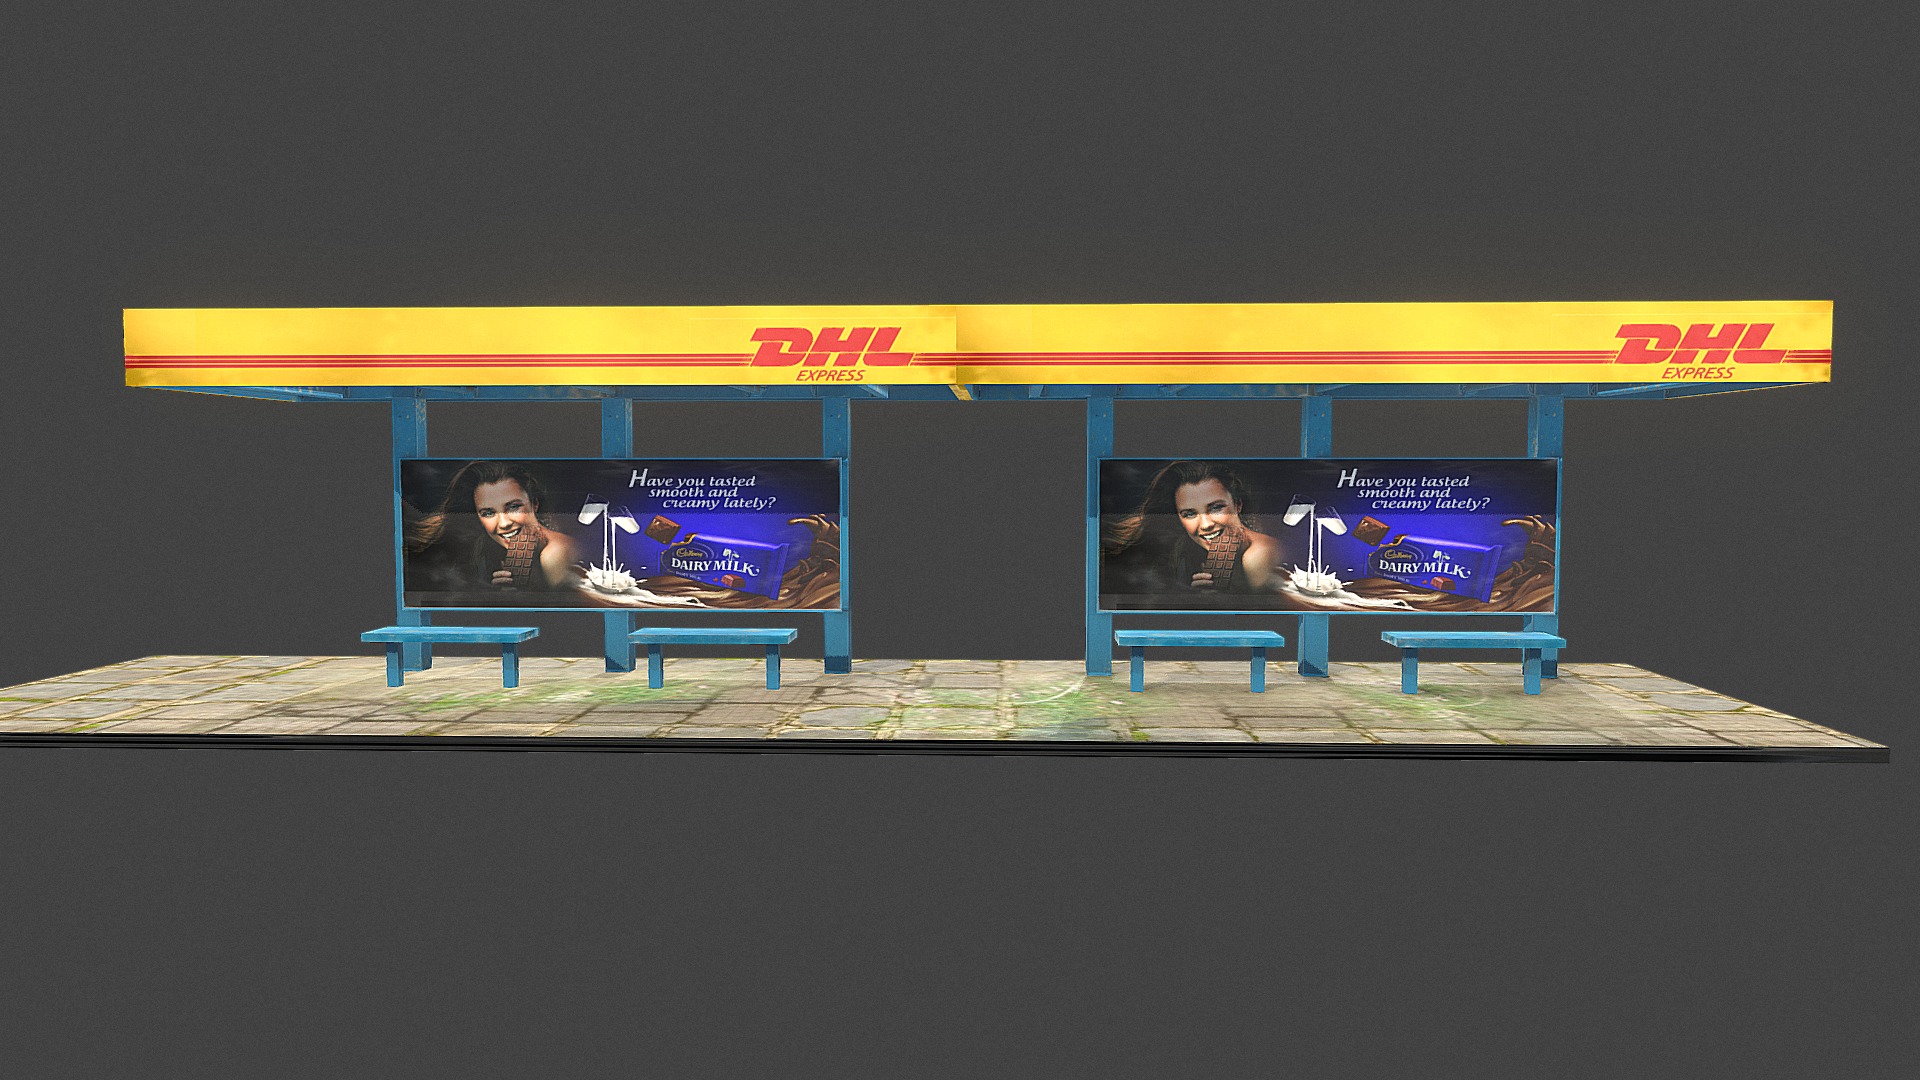 3D model Bustop - This is a 3D model of the Bustop. The 3D model is about a couple of people sitting on a bench with a large screen behind them.